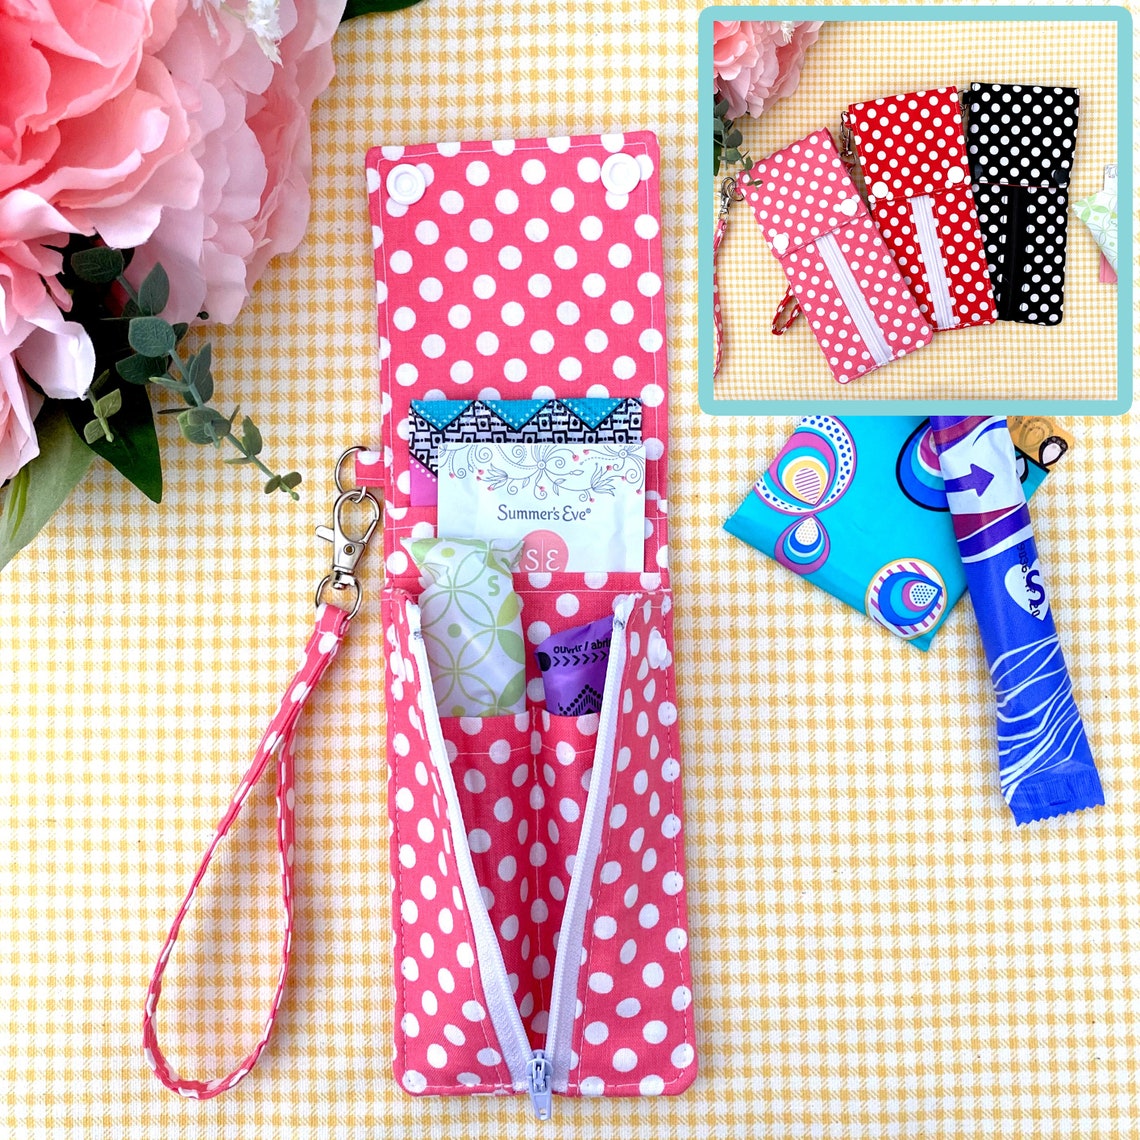 Tampon Pouch Sanitary Pouch Travel Tampon Holder Privacy